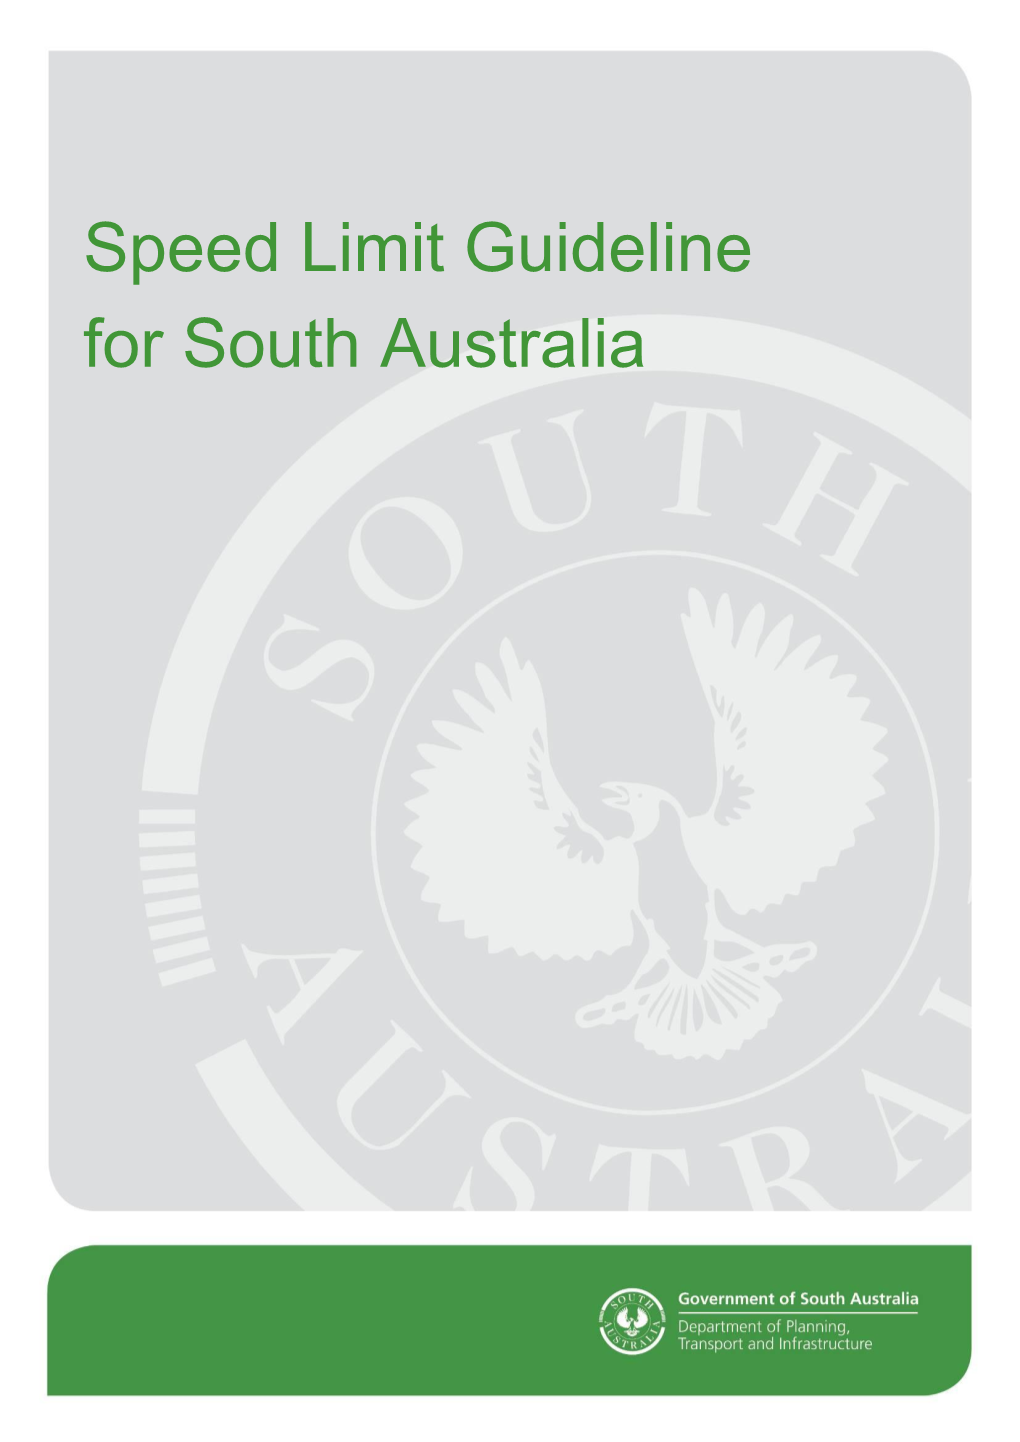 Speed Limit Guideline for South Australia